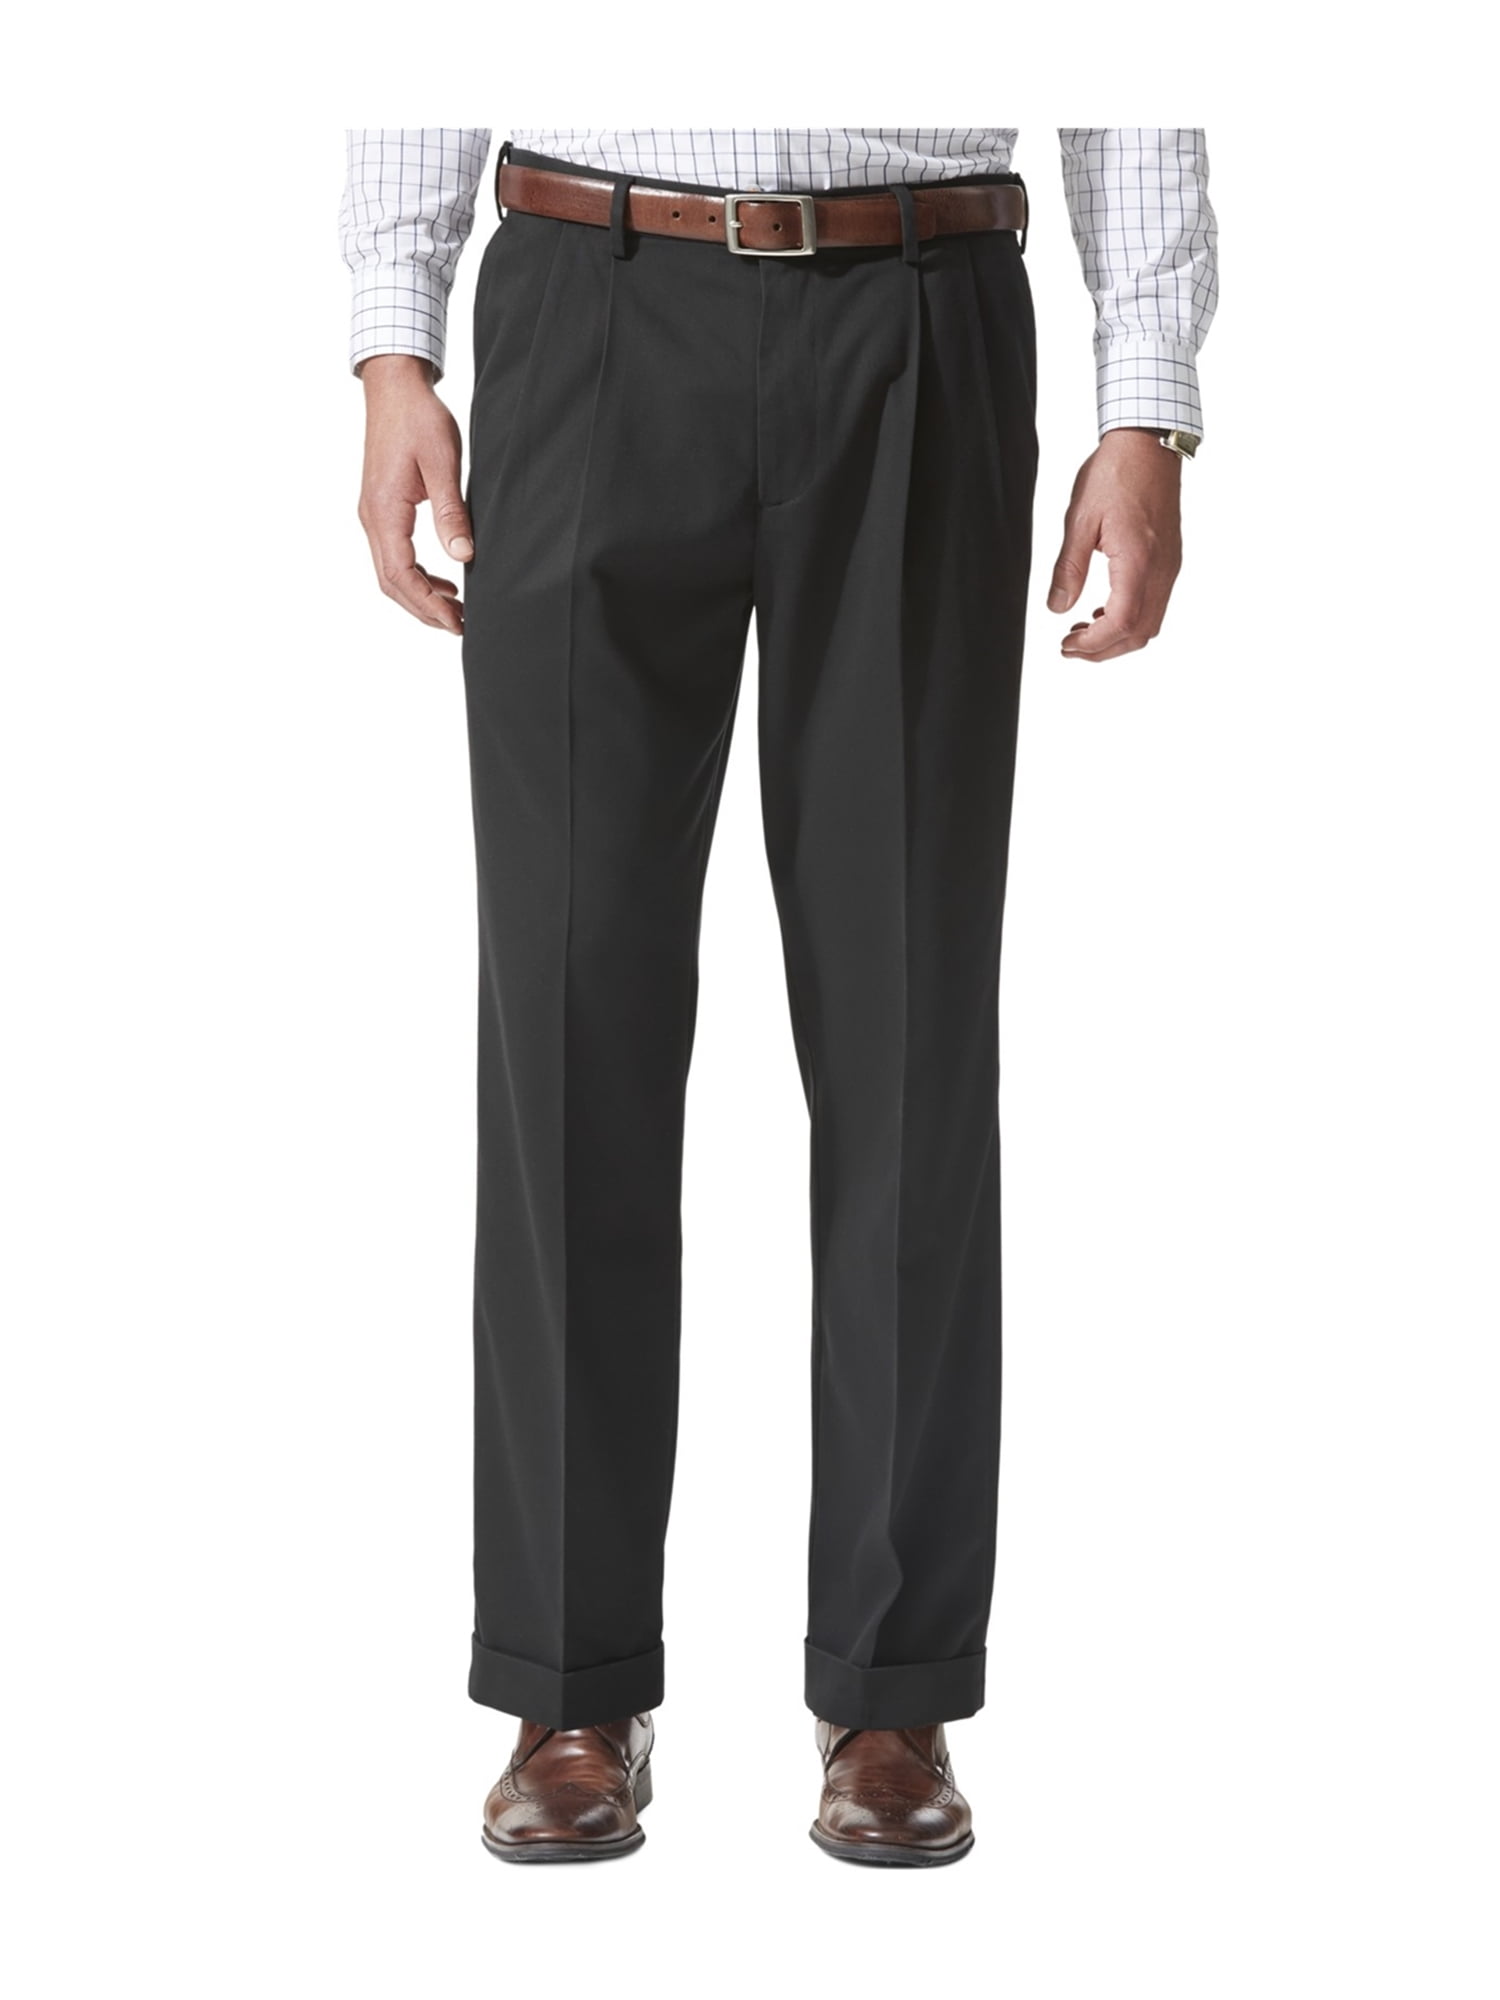 Dockers Mens Relaxed Fit Comfort Casual Chino Pants black 40x32 ...